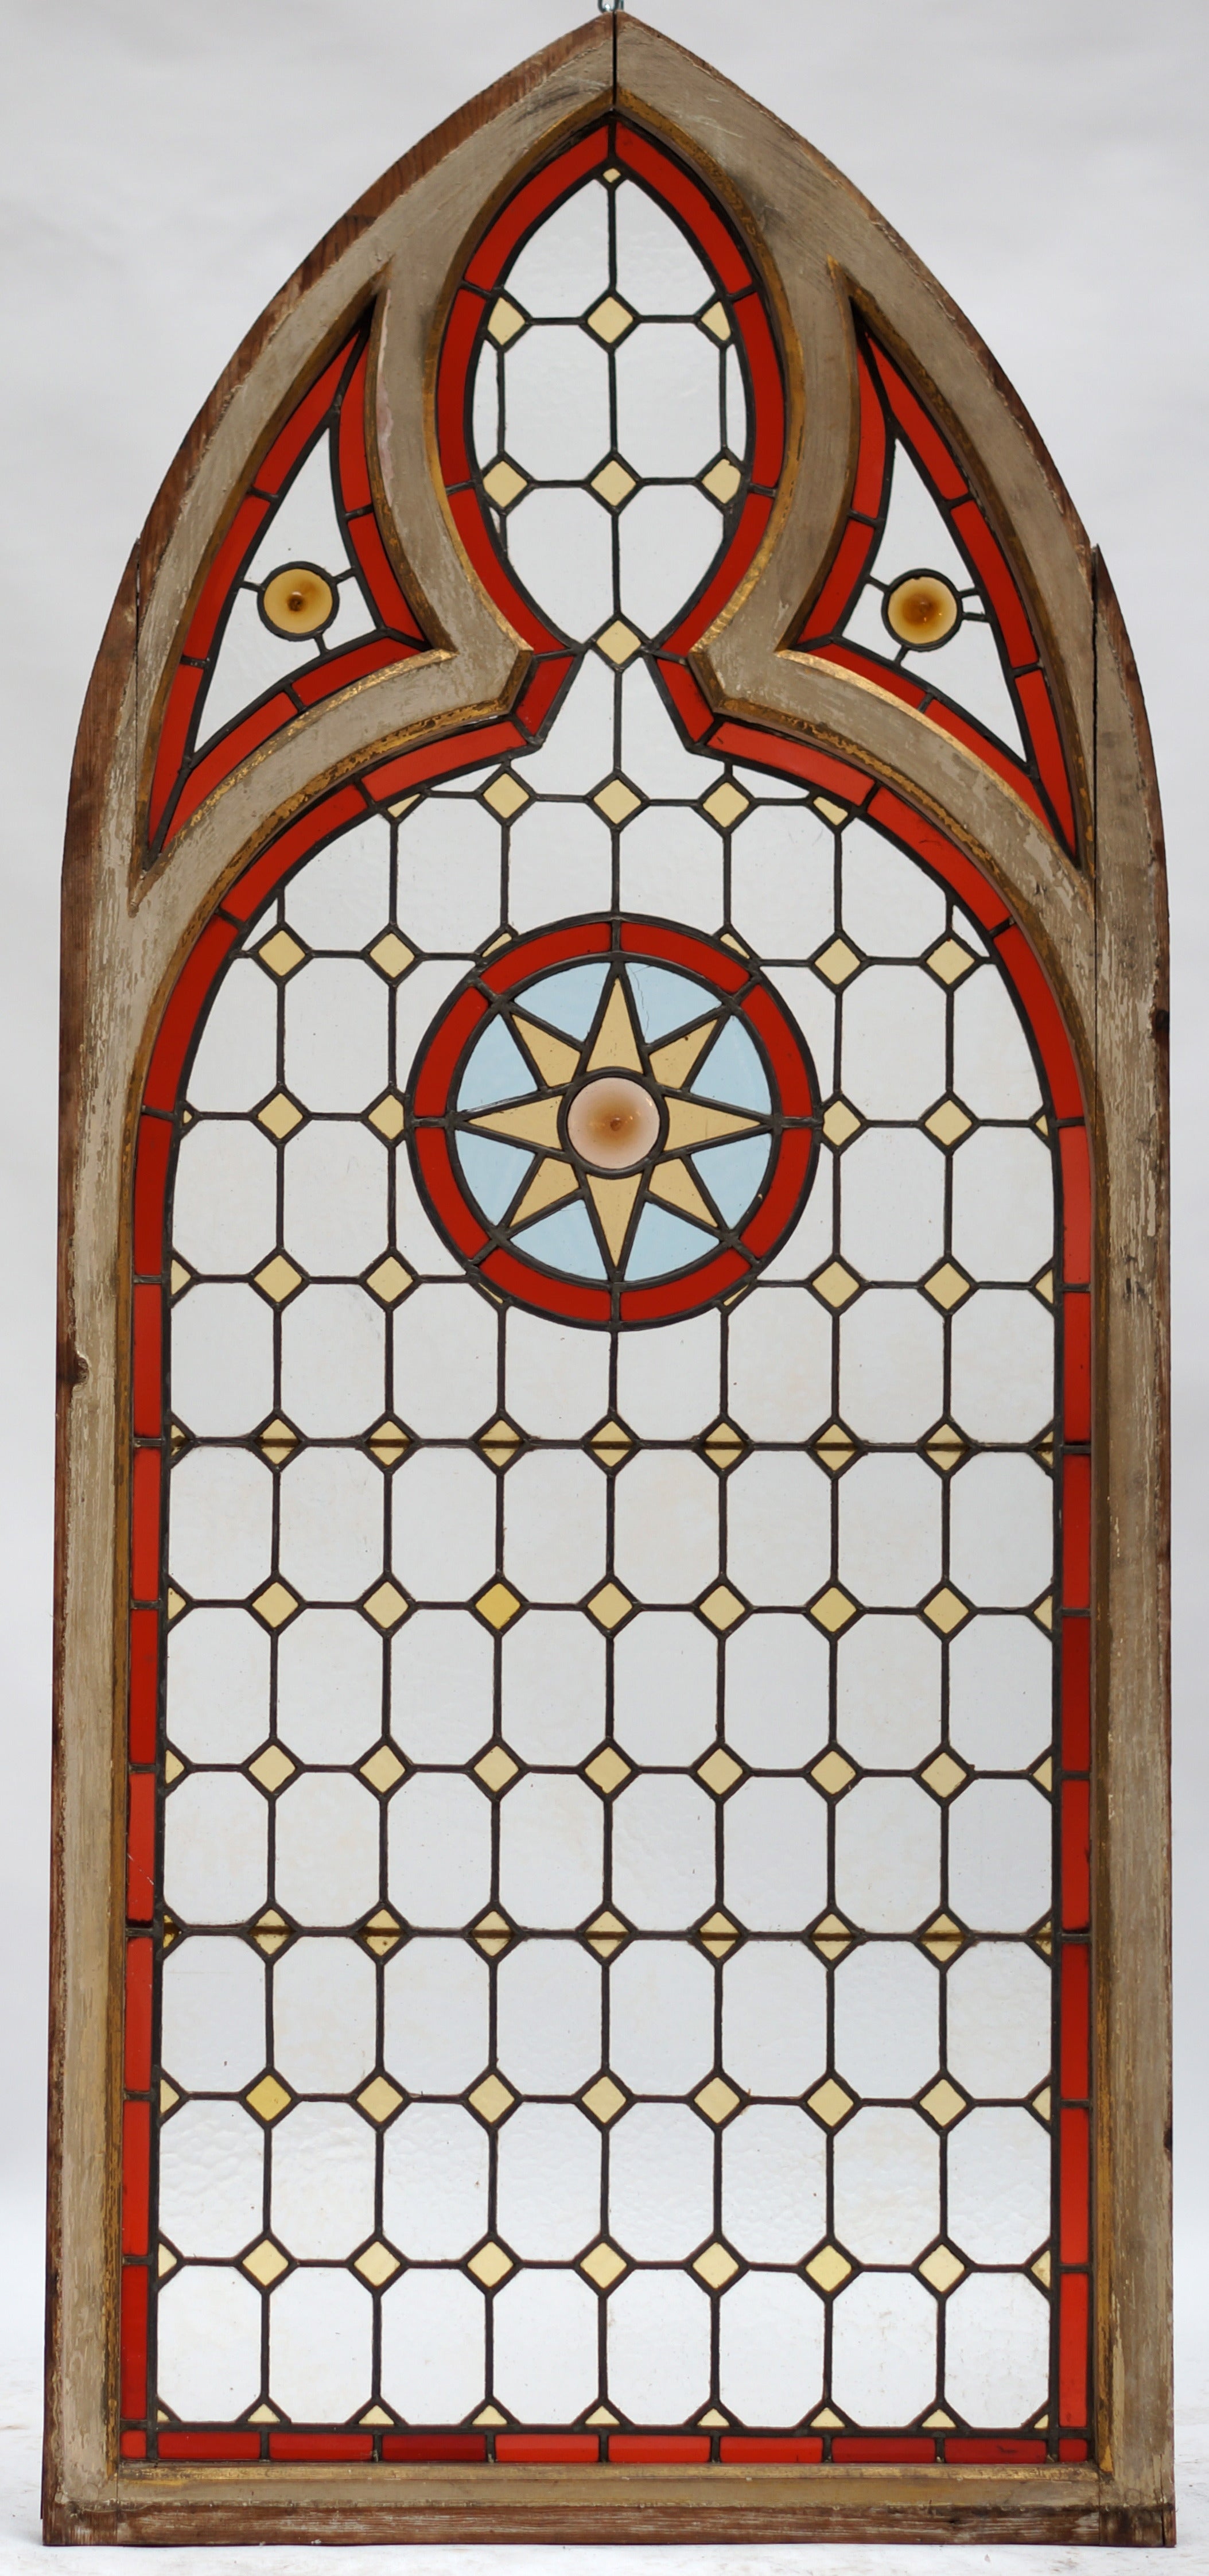 Neo-Gothic Stained Glass Window